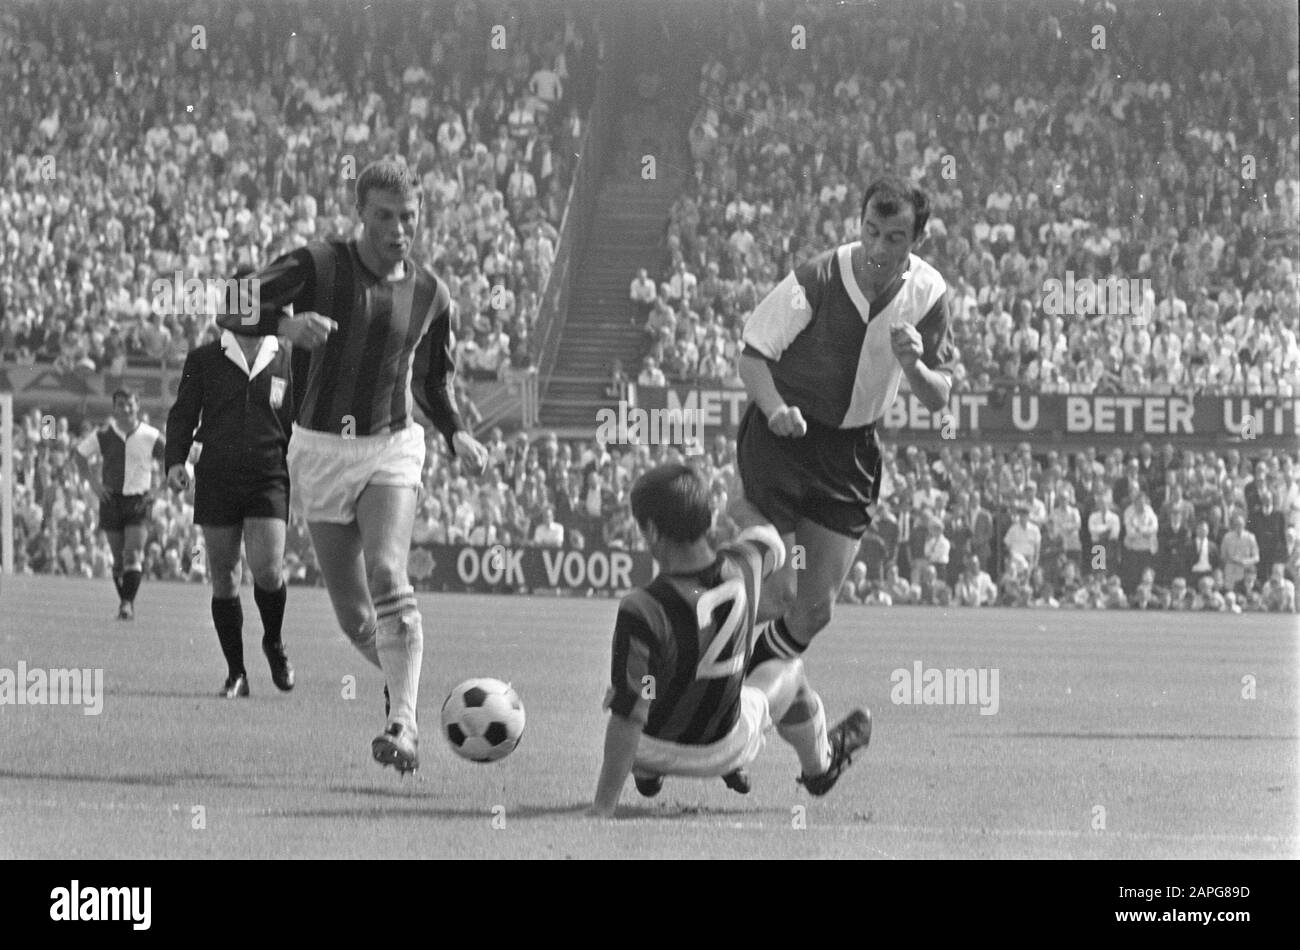 Feyenoord-DWS 3-0 Description: Coen Moulijn (right) in action Date: 25 august 1968 Location: Rotterdam, South-Holland Keywords: sport, football Personal name: Moulijn, Coen Stock Photo